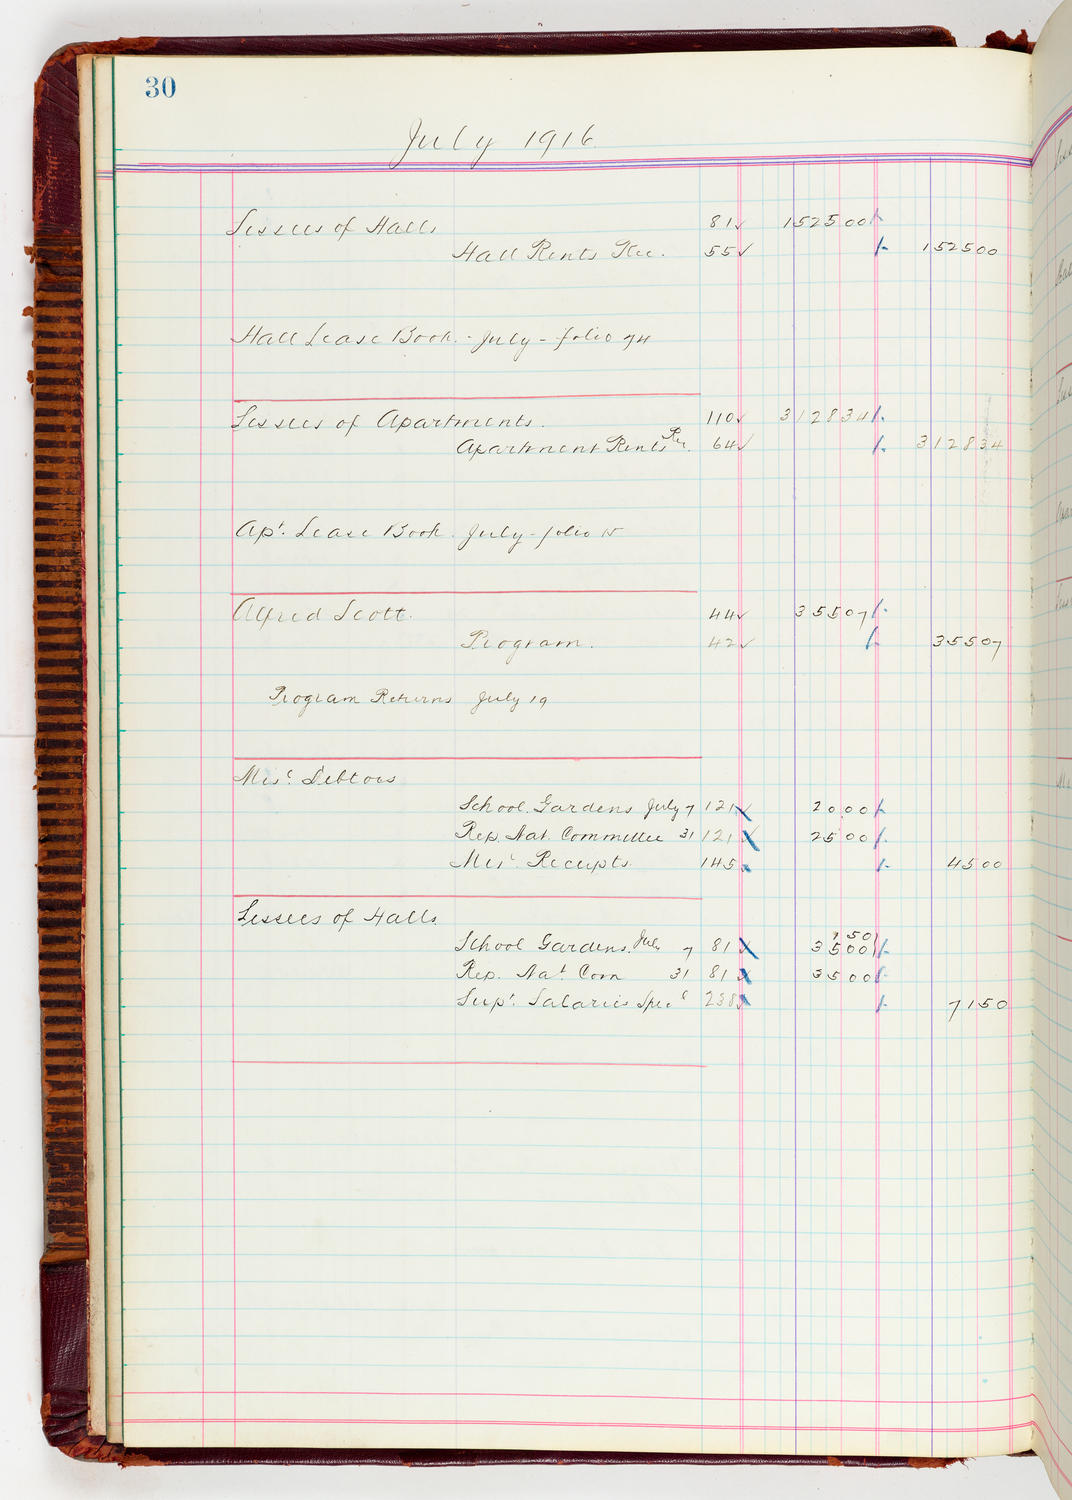 Music Hall Accounting Ledger, volume 5, page 30